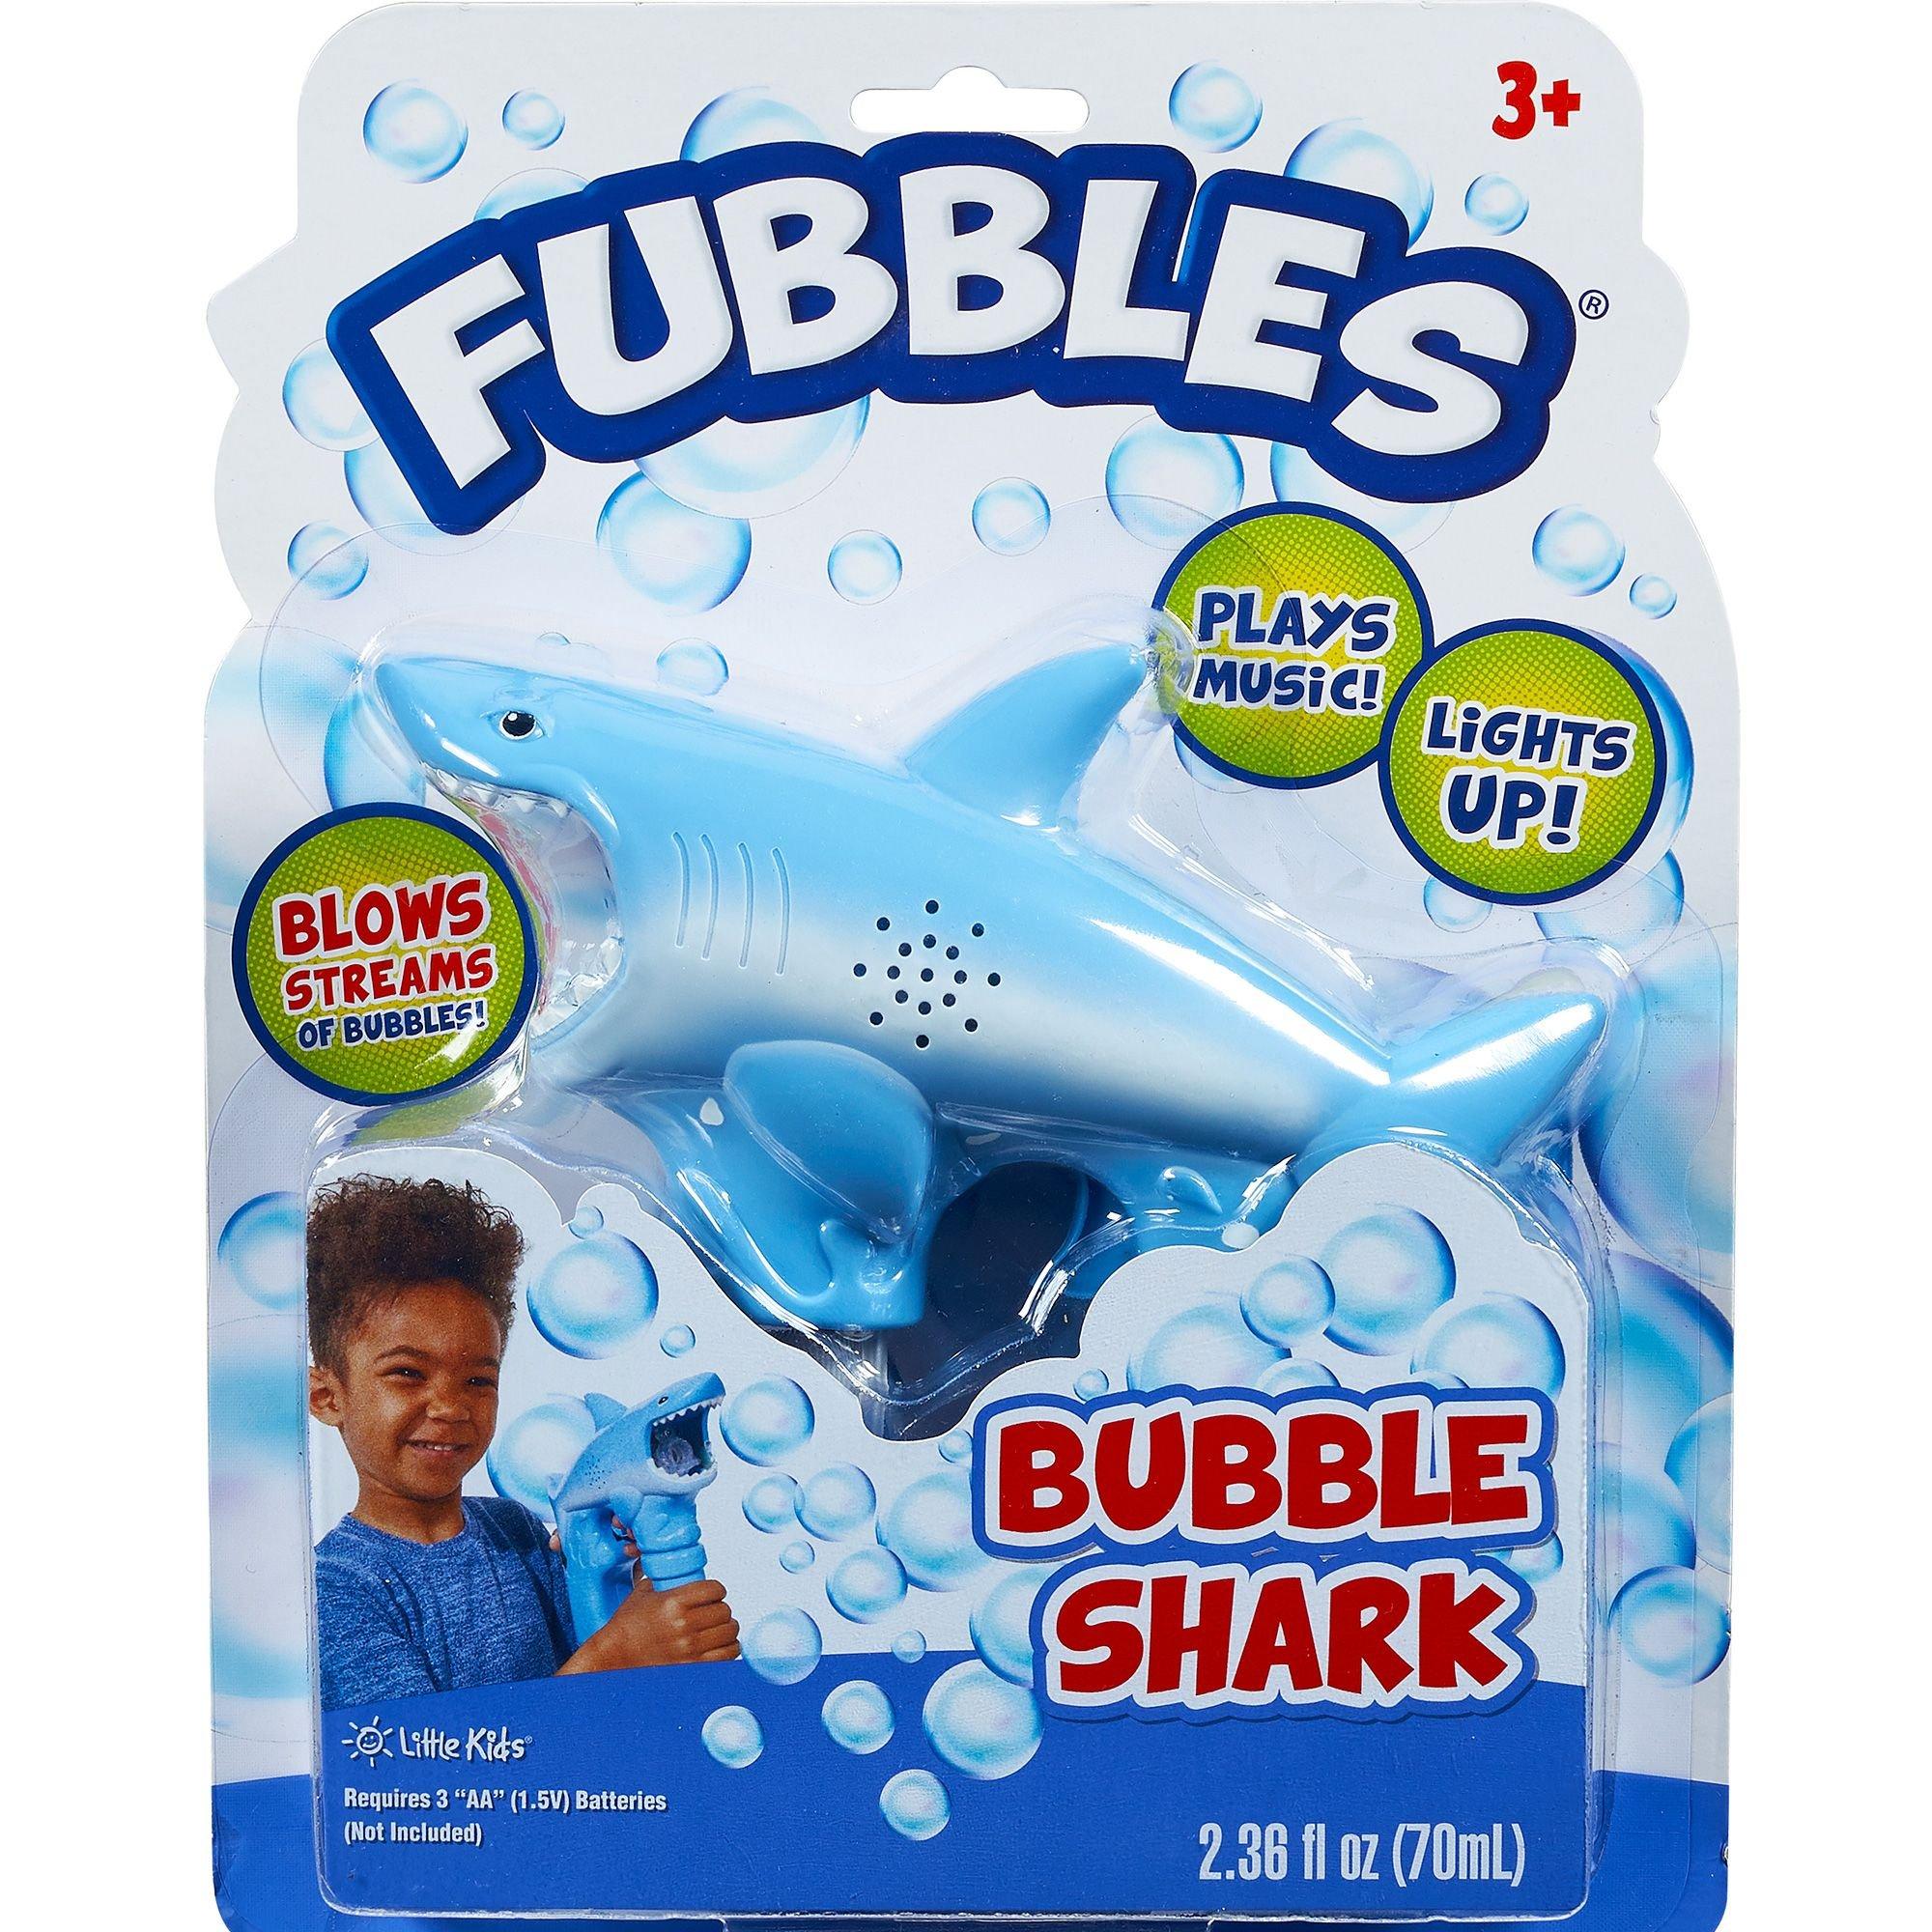 Play Day Light Up Bubble Blaster, Includes Bubble Solution